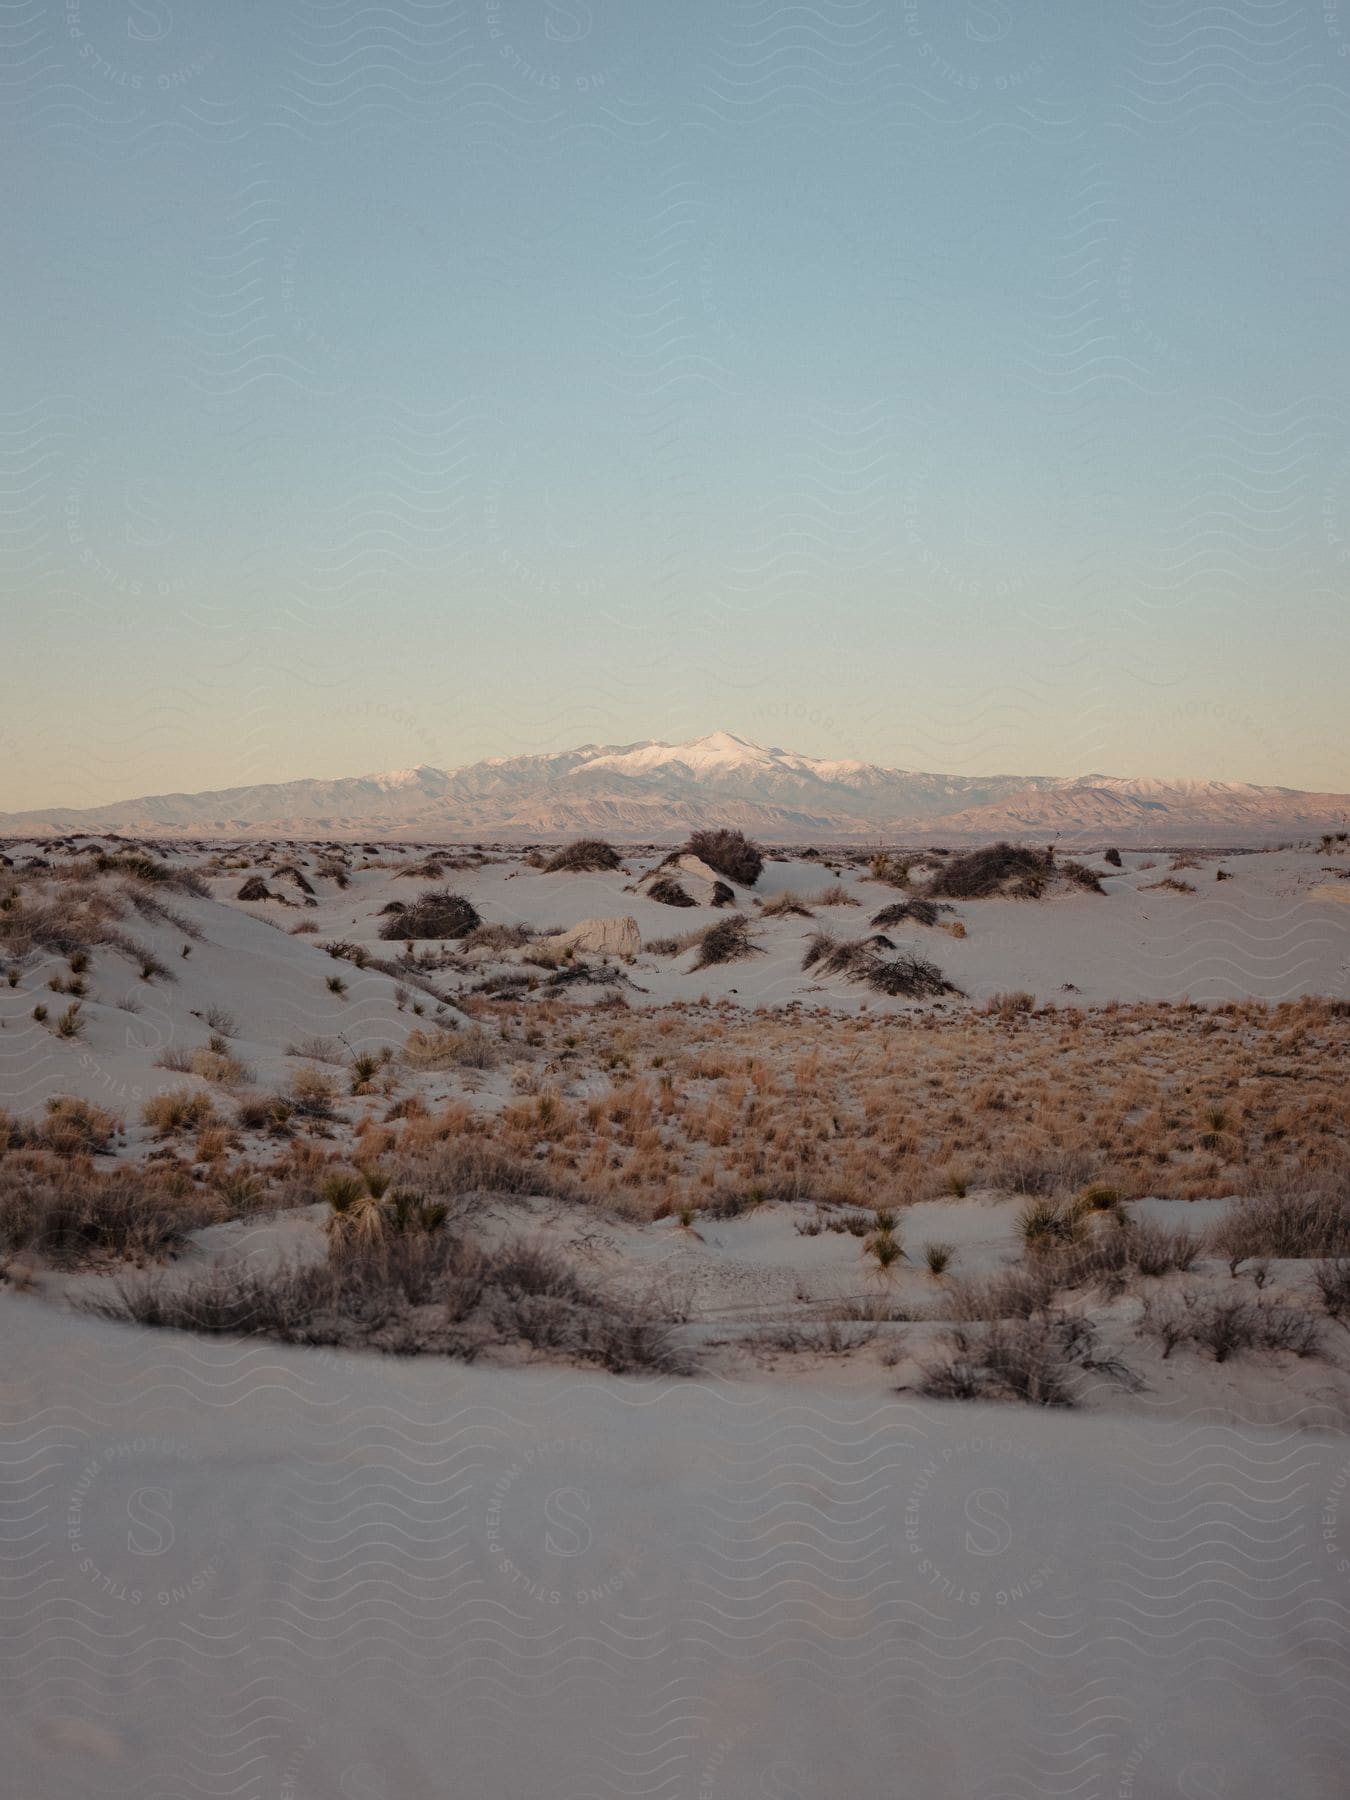 A barren desert landscape with snowcovered mountains in the background